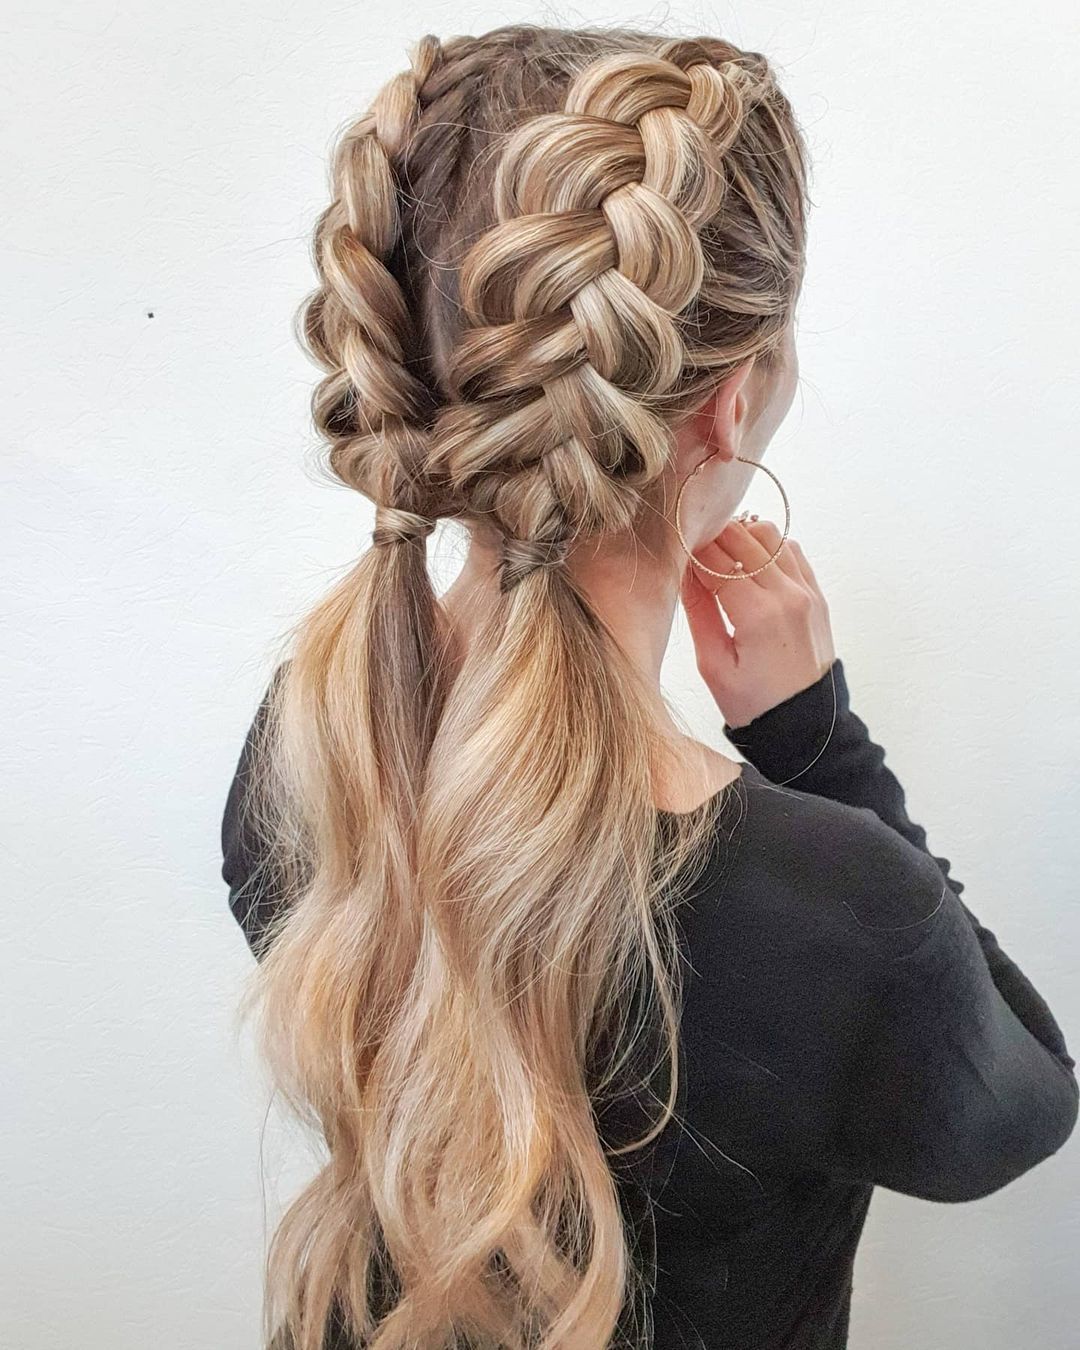 20 Of The Most Gorgeous Dutch Braid Ideas To Try This Year | Hair.com By  L'Oréal